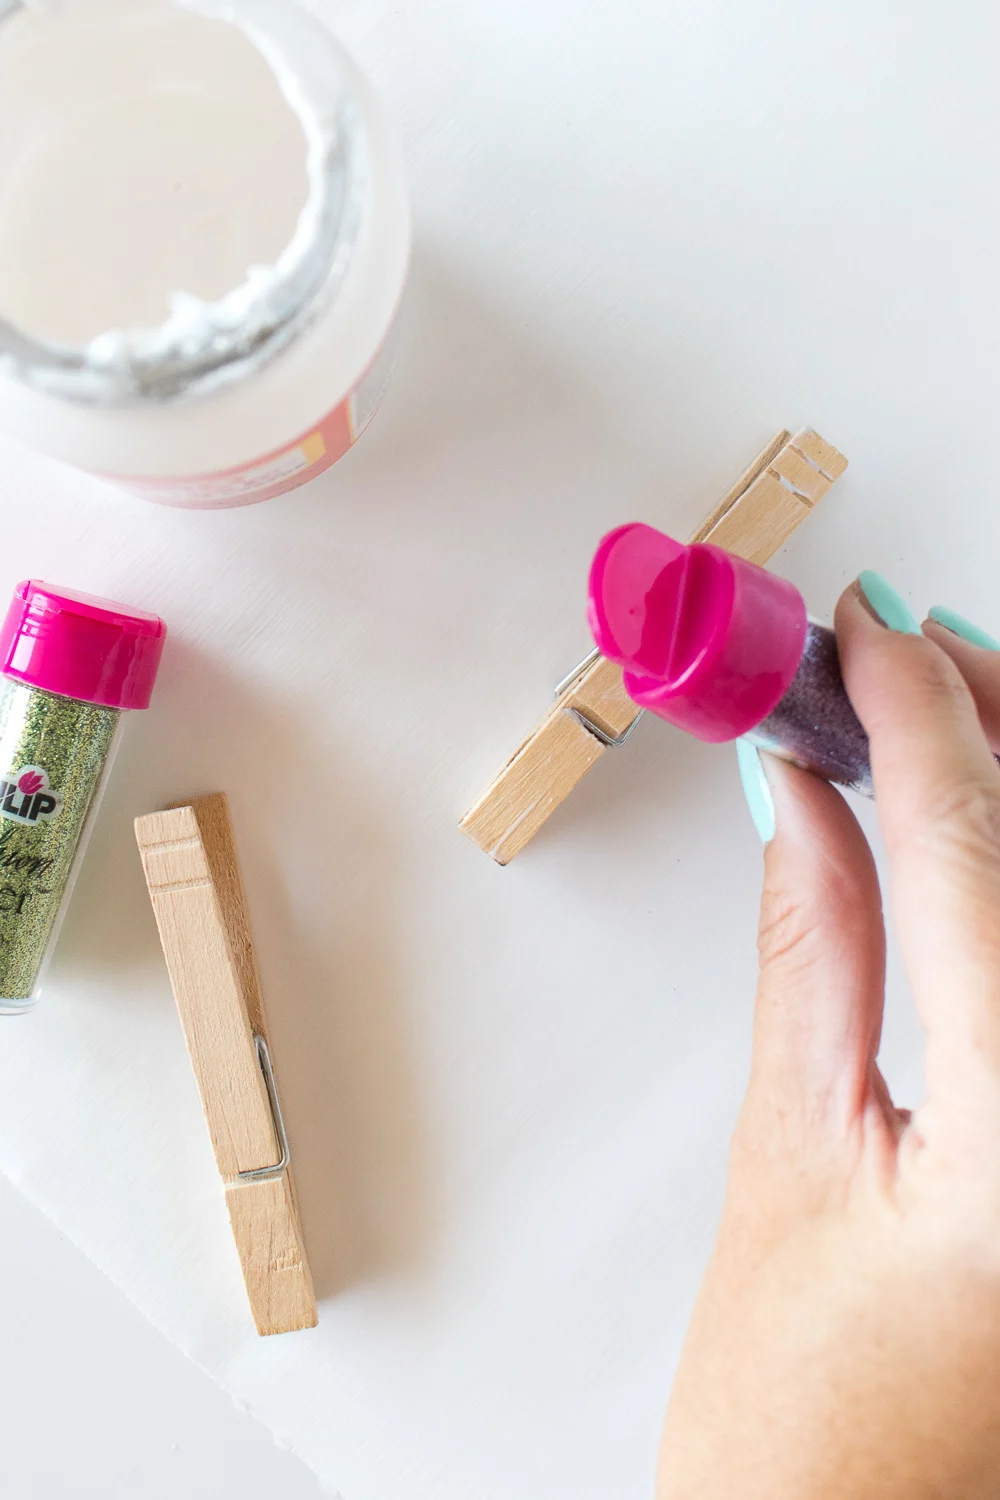 sprinkling glitter on the top of clothespins